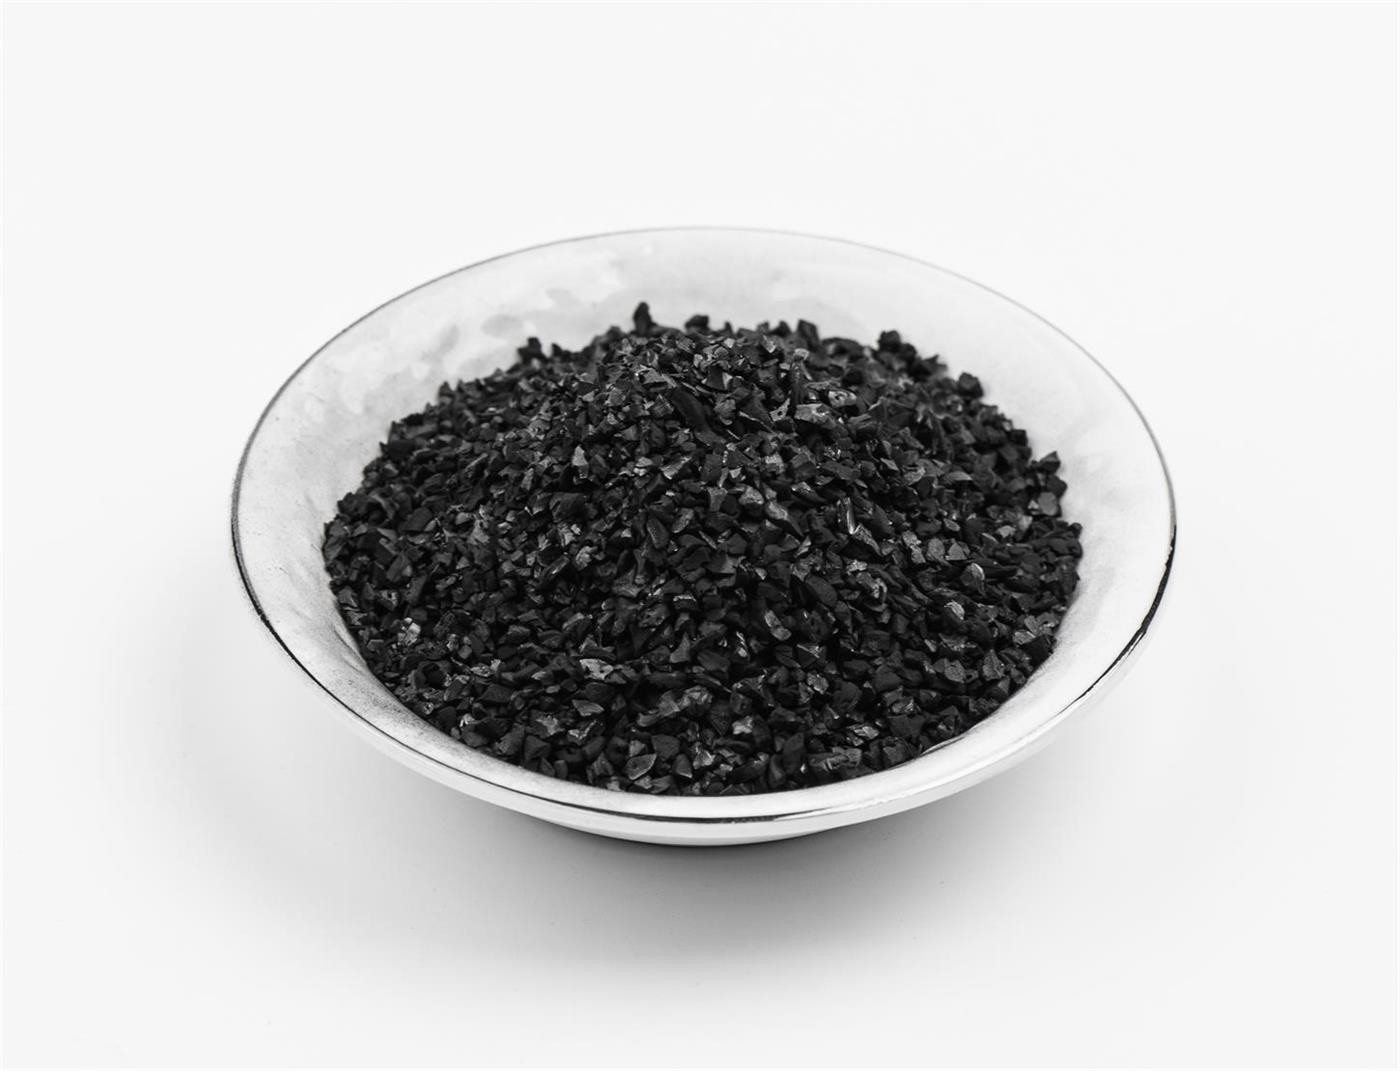  PH 6-8 Coconut Shell Activated Carbon Petrochemical Industry Apparent Density 0.45-0.55g/Ml Manufactures